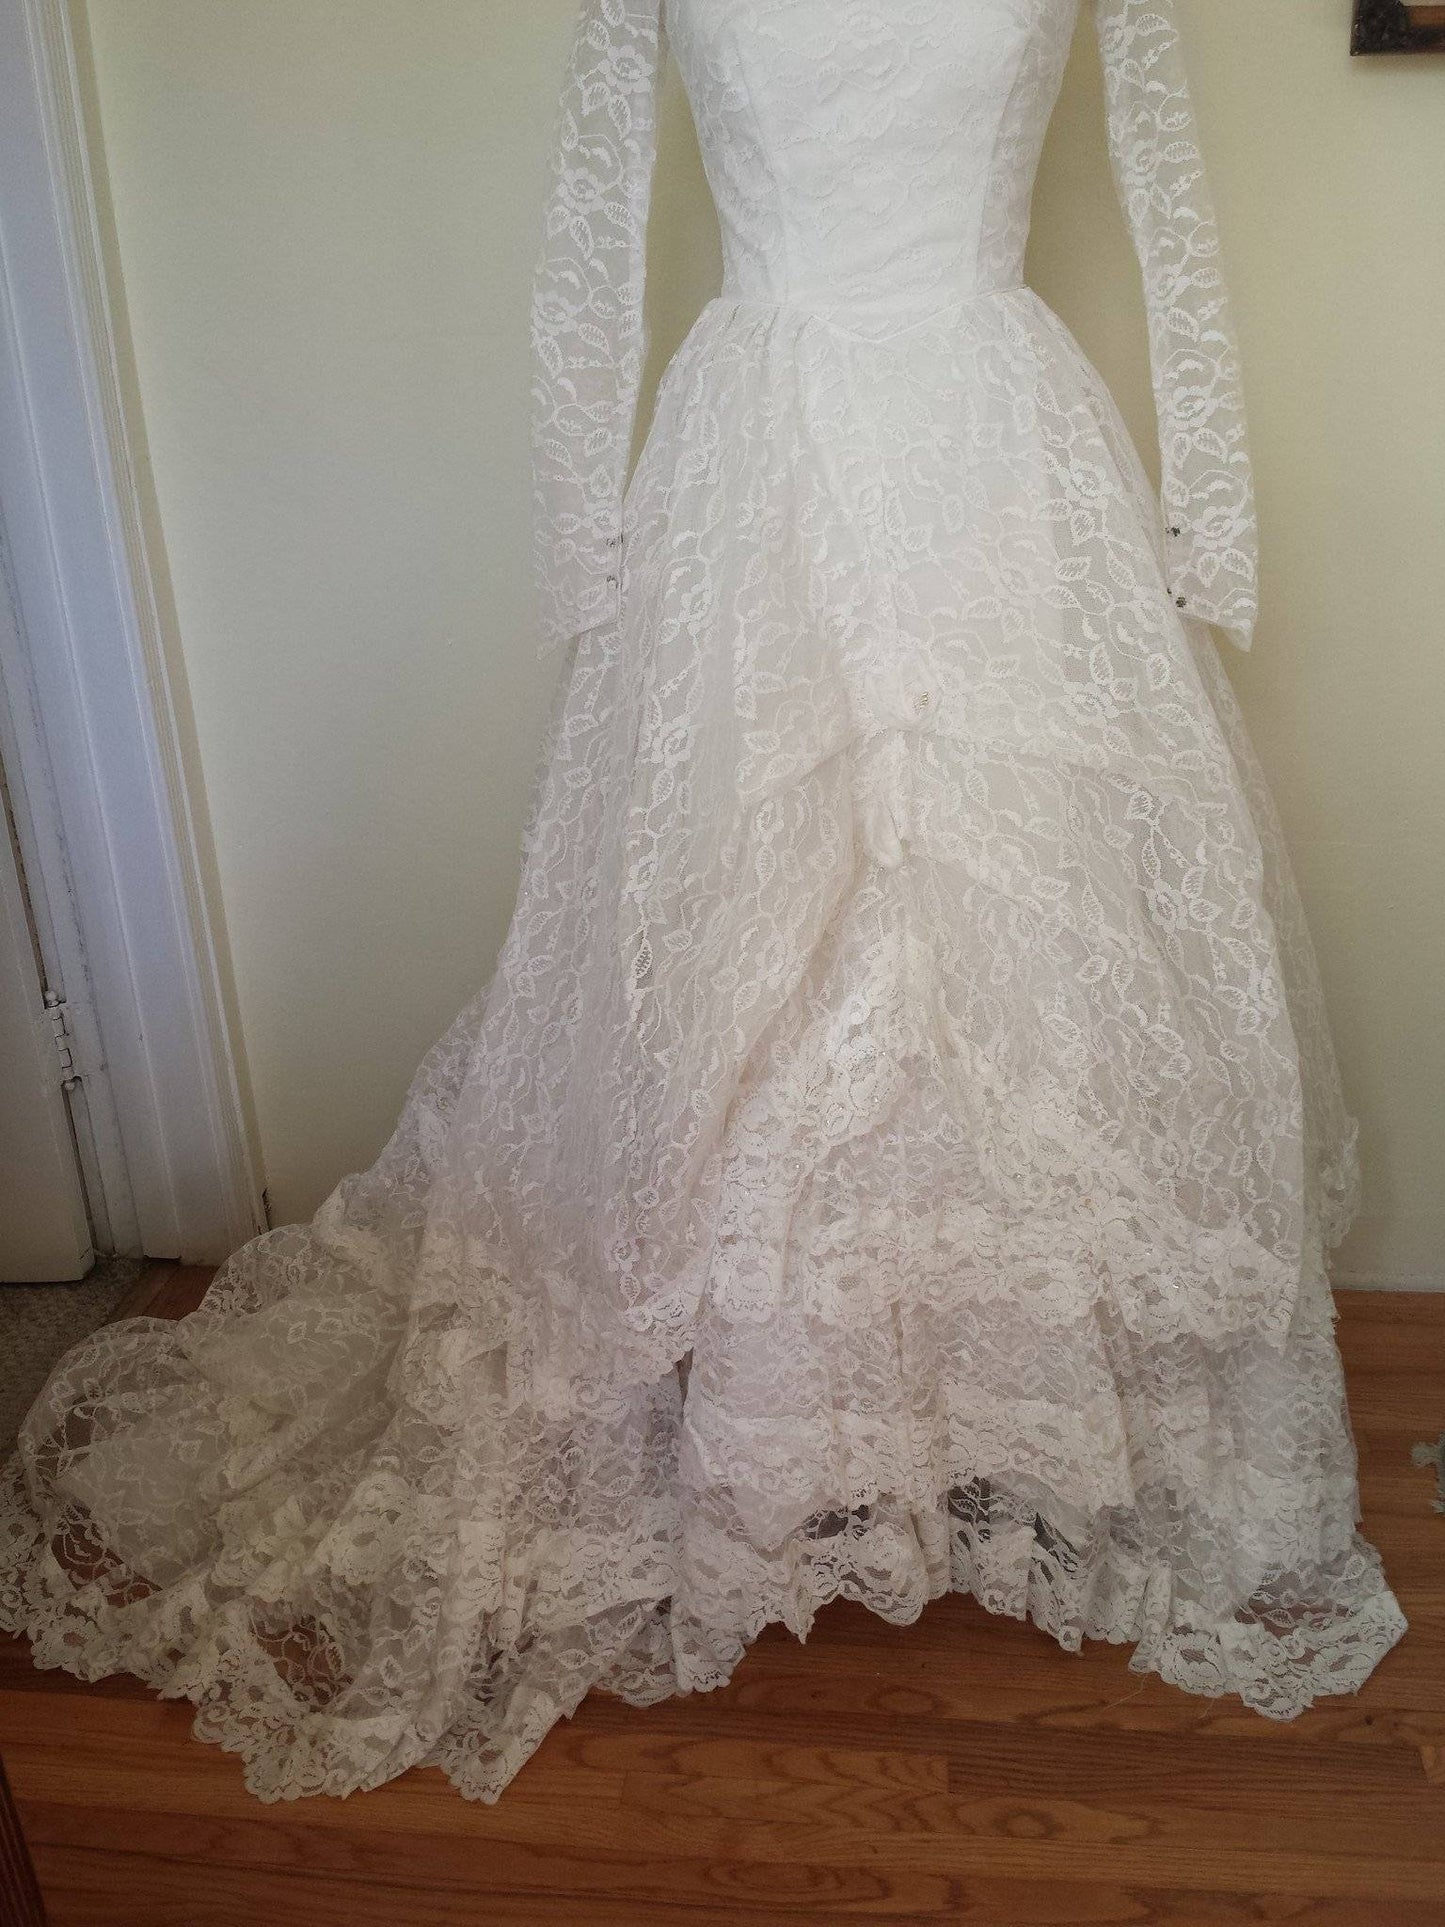 Vintage 1950s Grace Kelly Style Lace Wedding Gown-Toadstool Farm Vintage-1950s Dress,1950s Weddind Dress,50s Bridal Gown,50s Dress,Bridal,Bride,Grace Kelly Style,Lace Skirt,Metal Zipper,Vintage,Vintage Clothing,Vintage Dress,Vintage Dresses,Vintage Wedding Gown